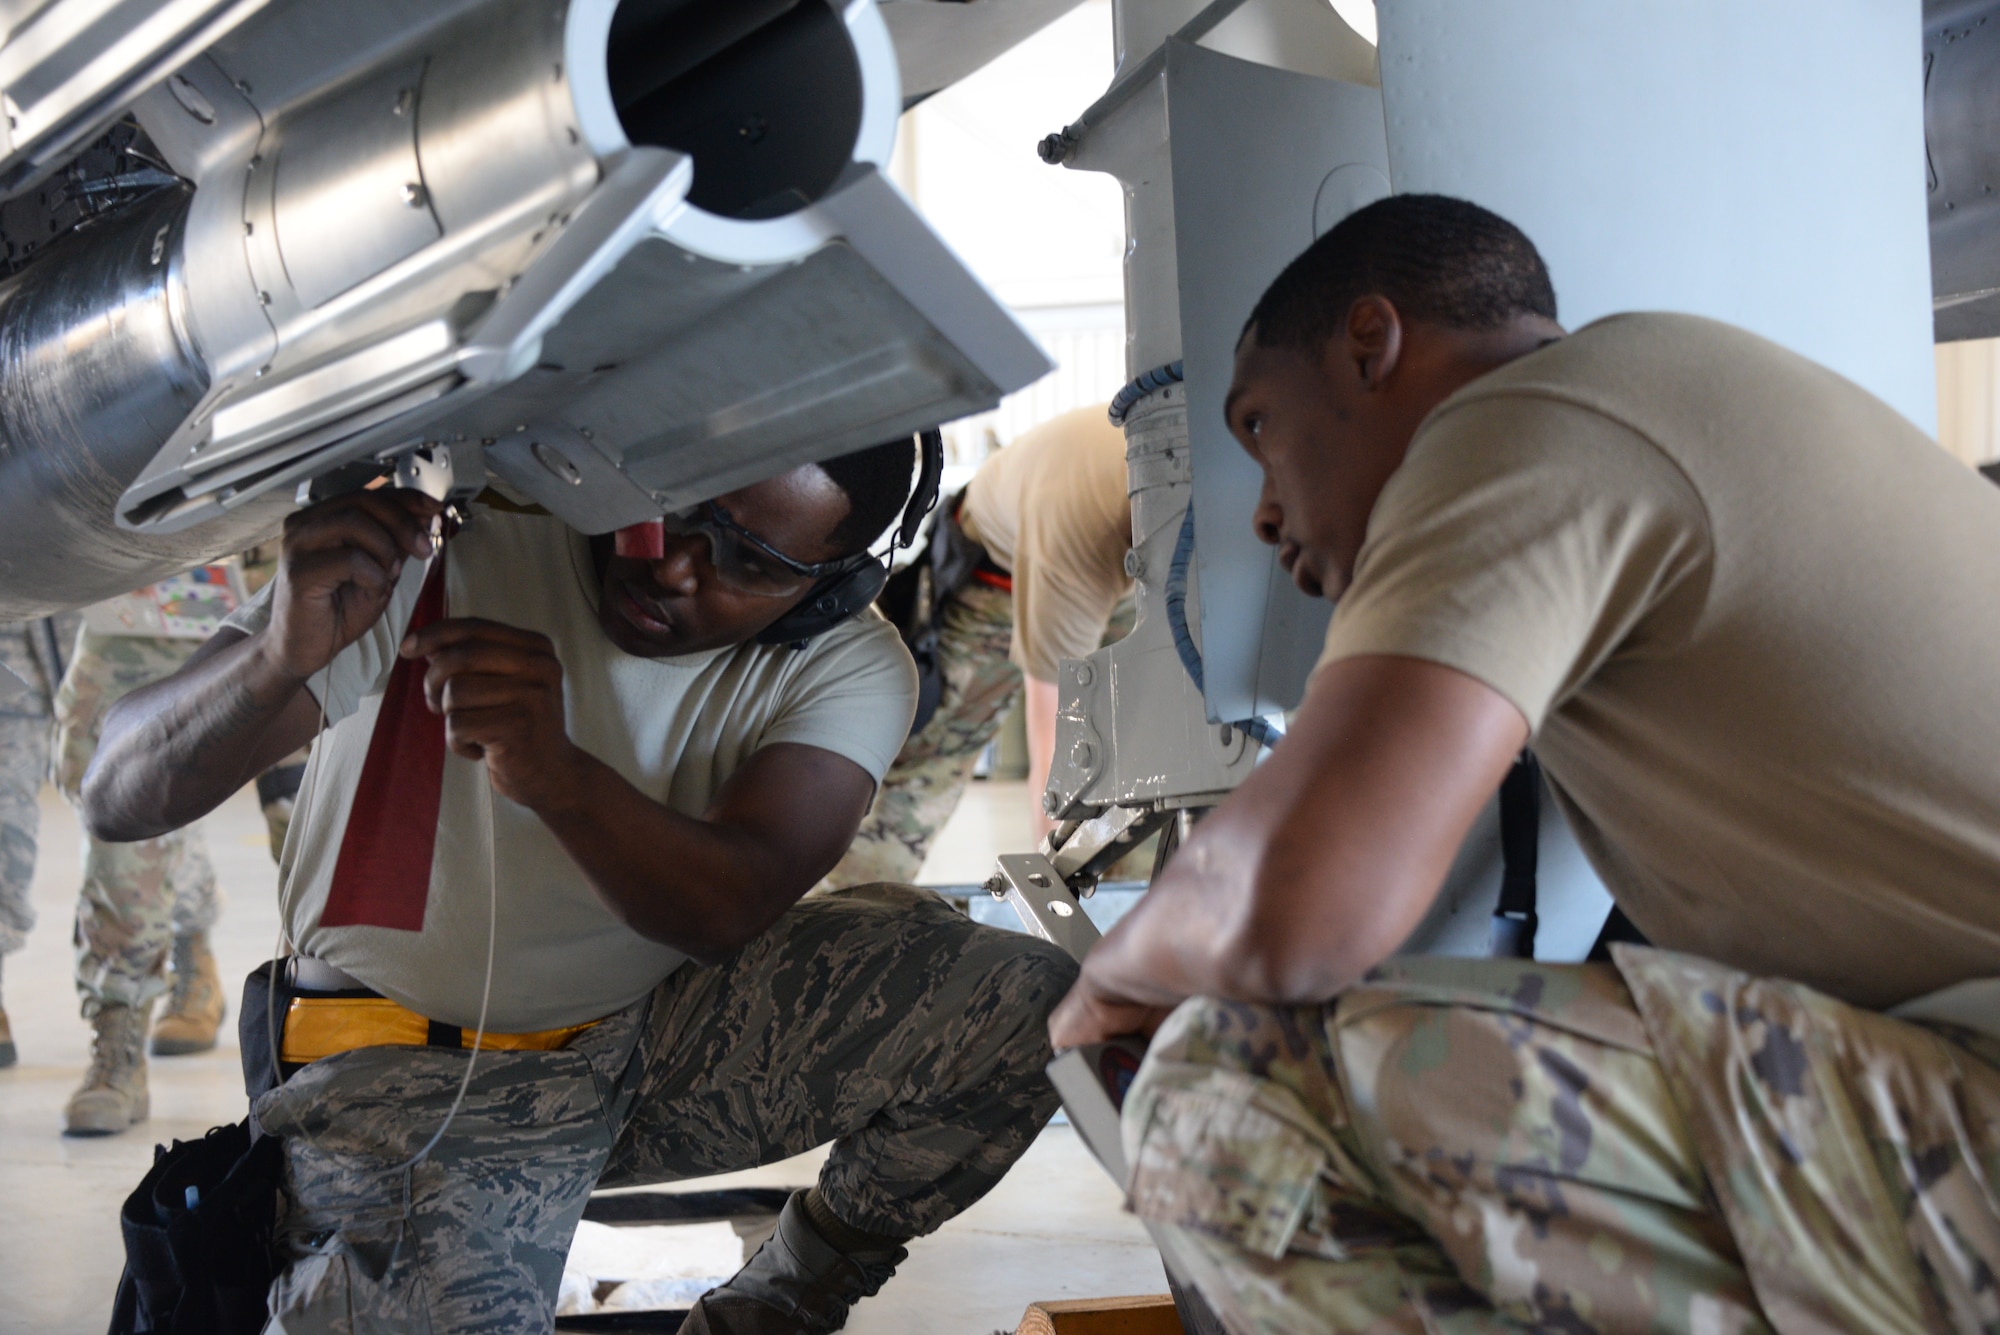 A photo of Airmen working on munitions